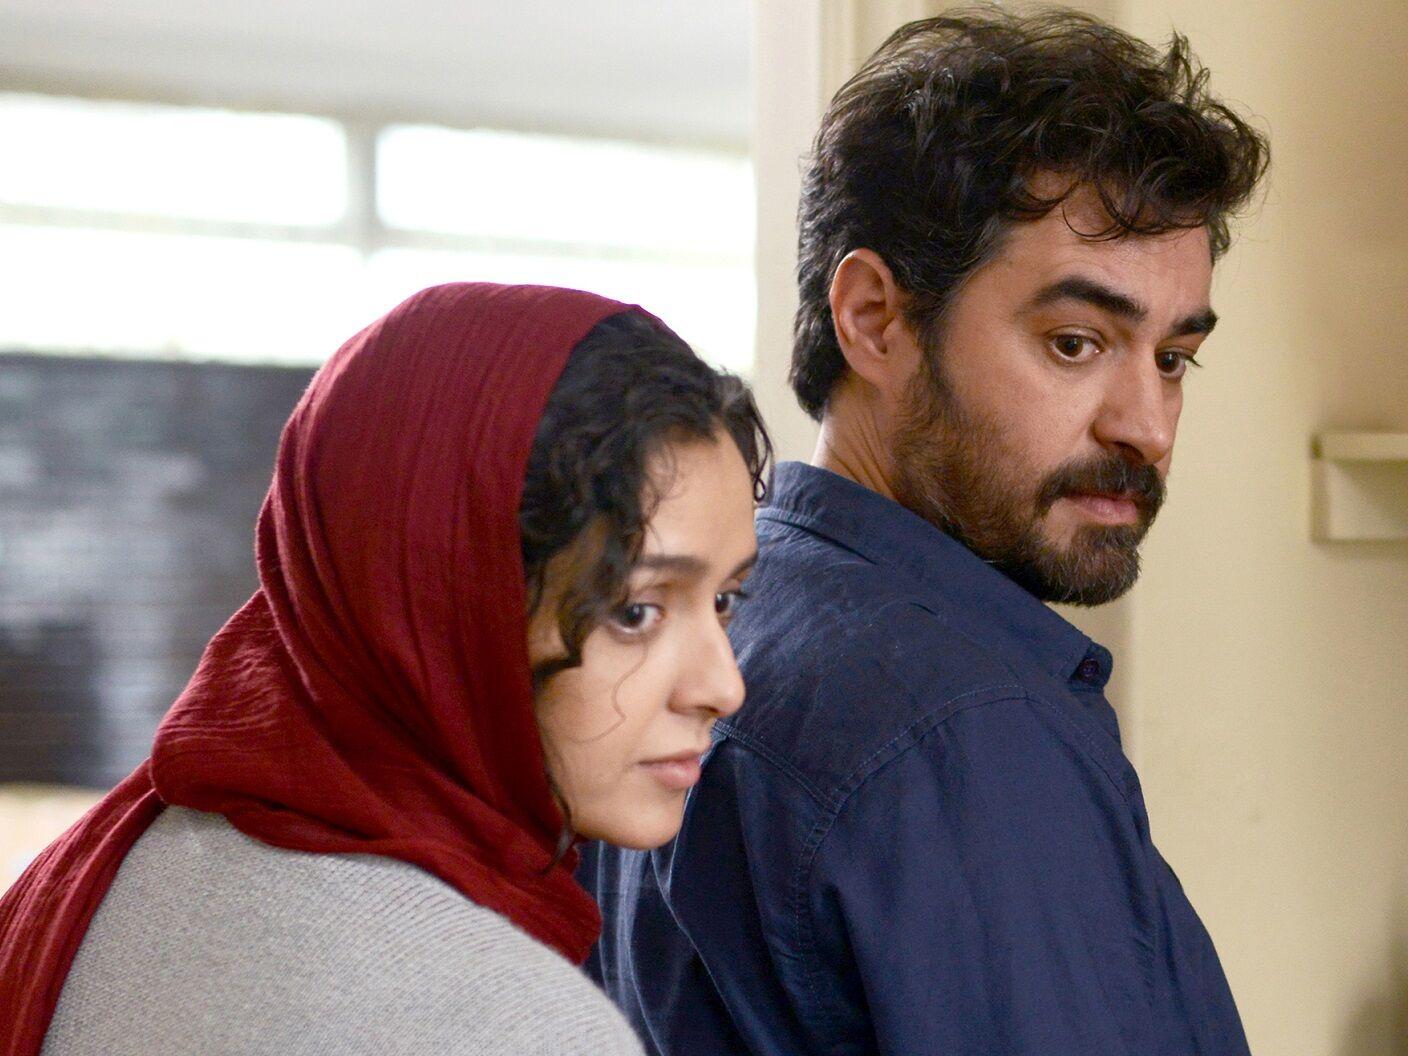 The power of 'The Salesman' comes from putting pieces together